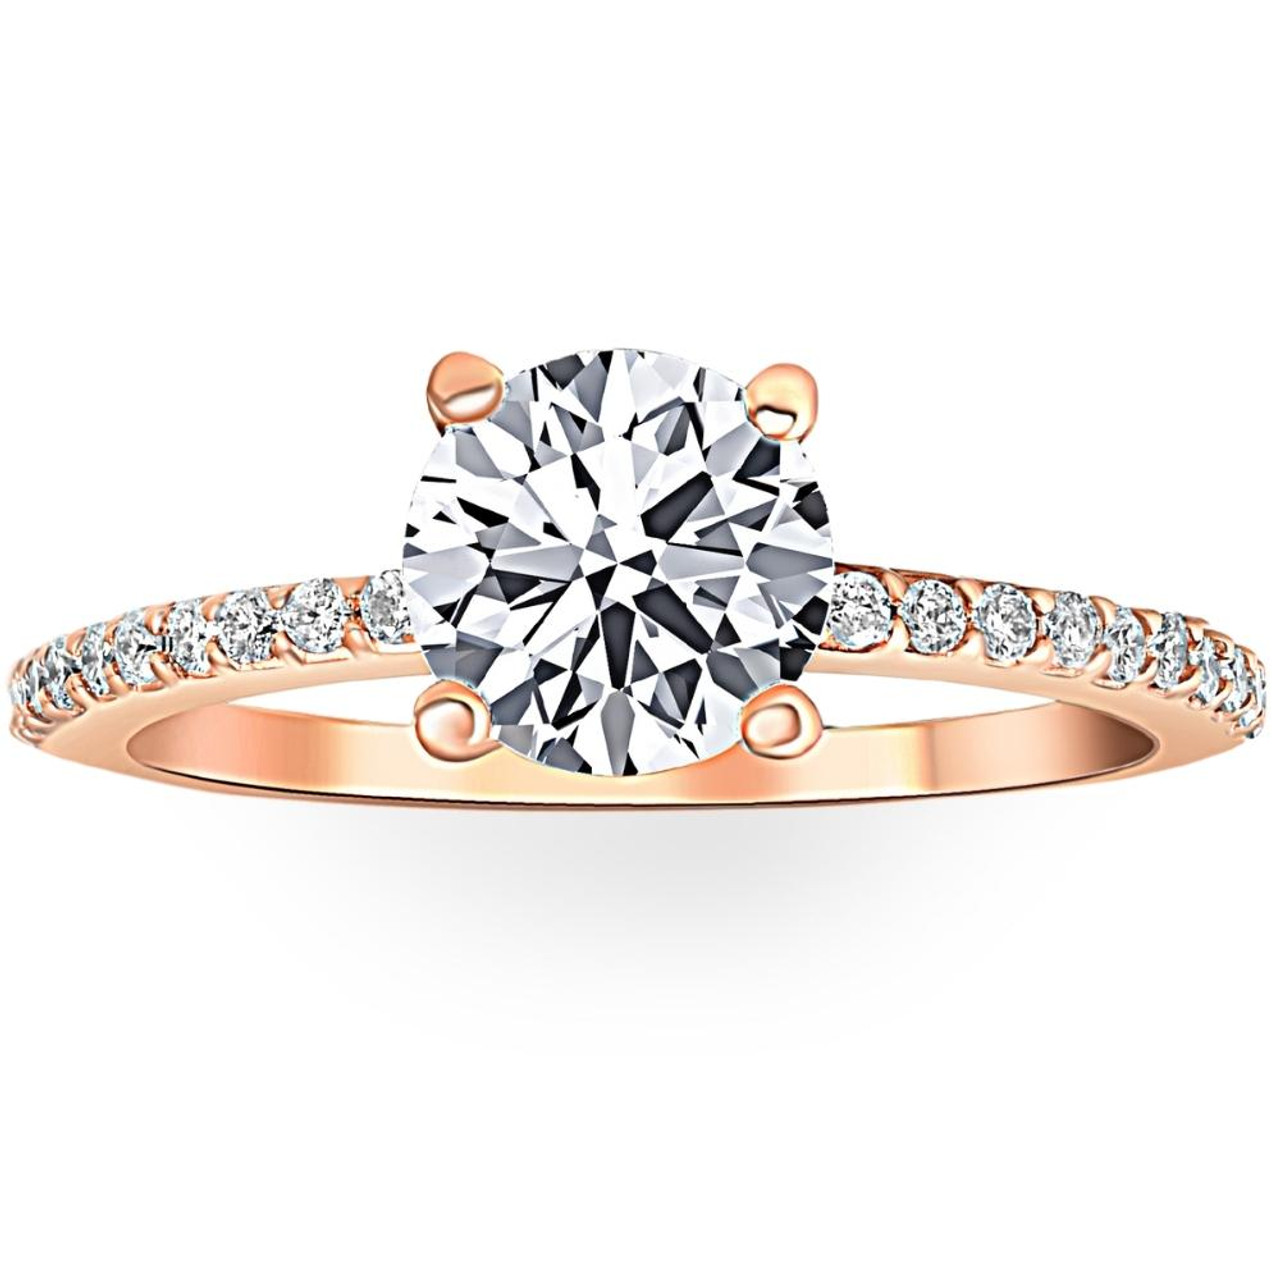 pave ring setting type in an engagement ring